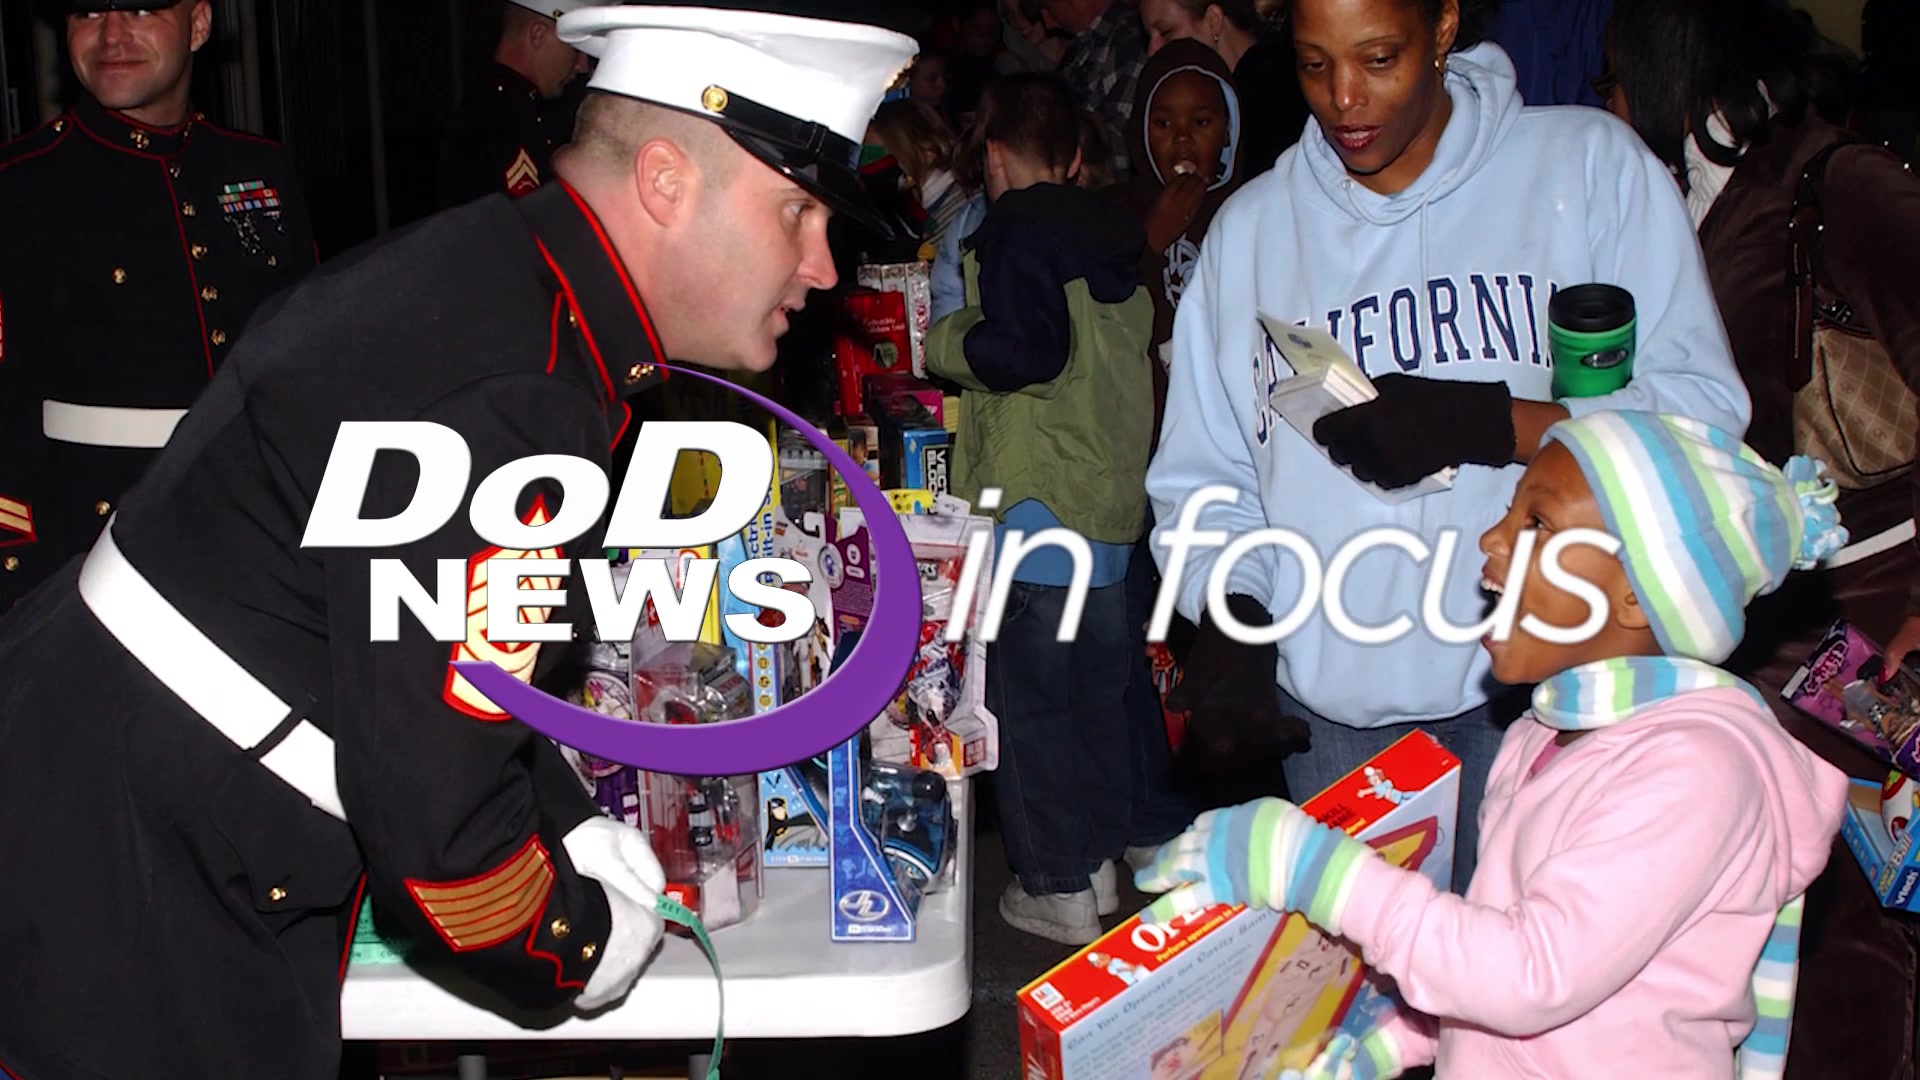 Marine Corps Capt. Peter Smith discusses the important role the Toys for Tots program, established in 1947, plays throughout local communities.